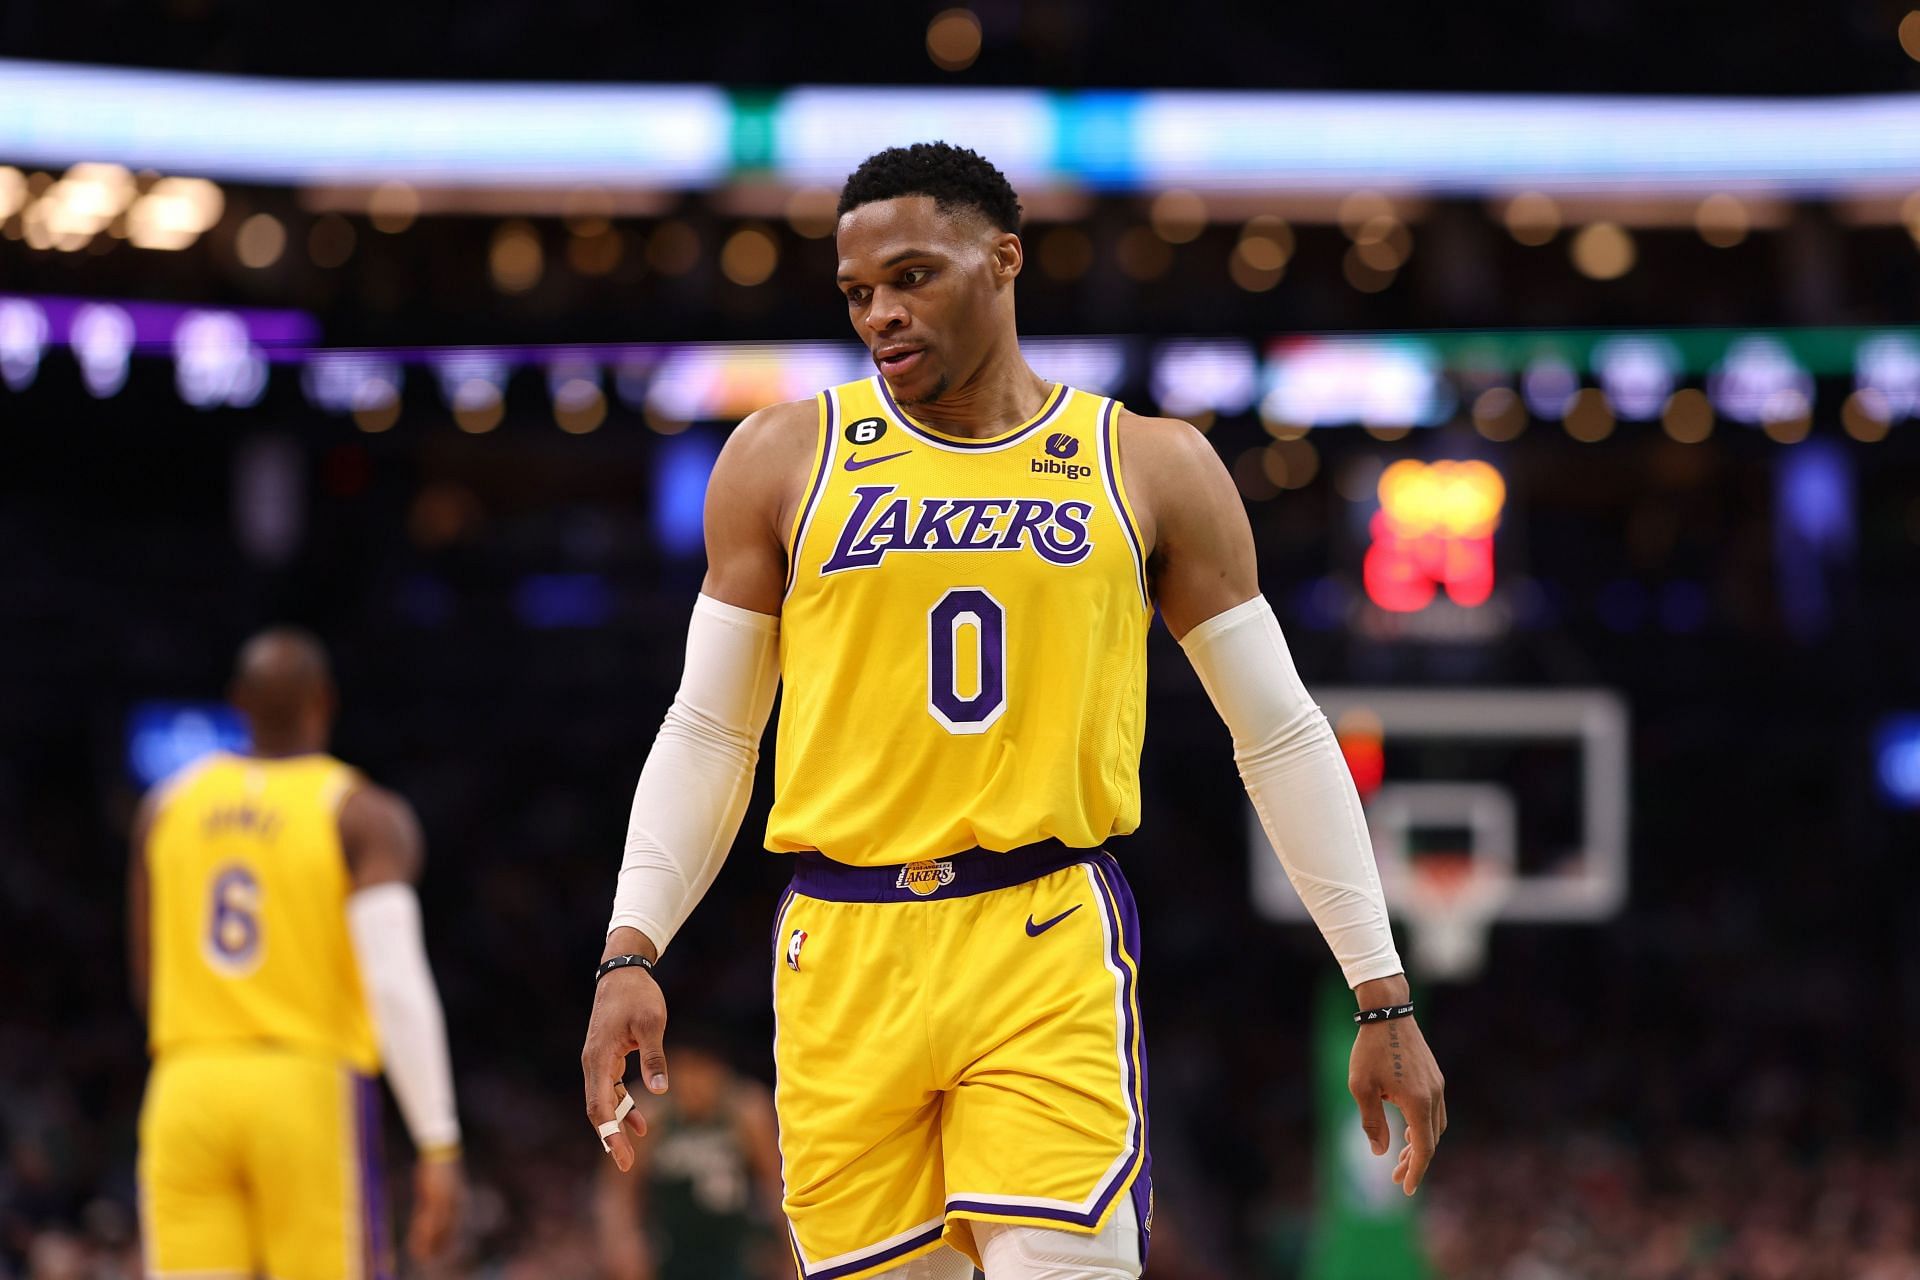 Should Russell Westbrook and Patrick Beverley get rings if Lakers